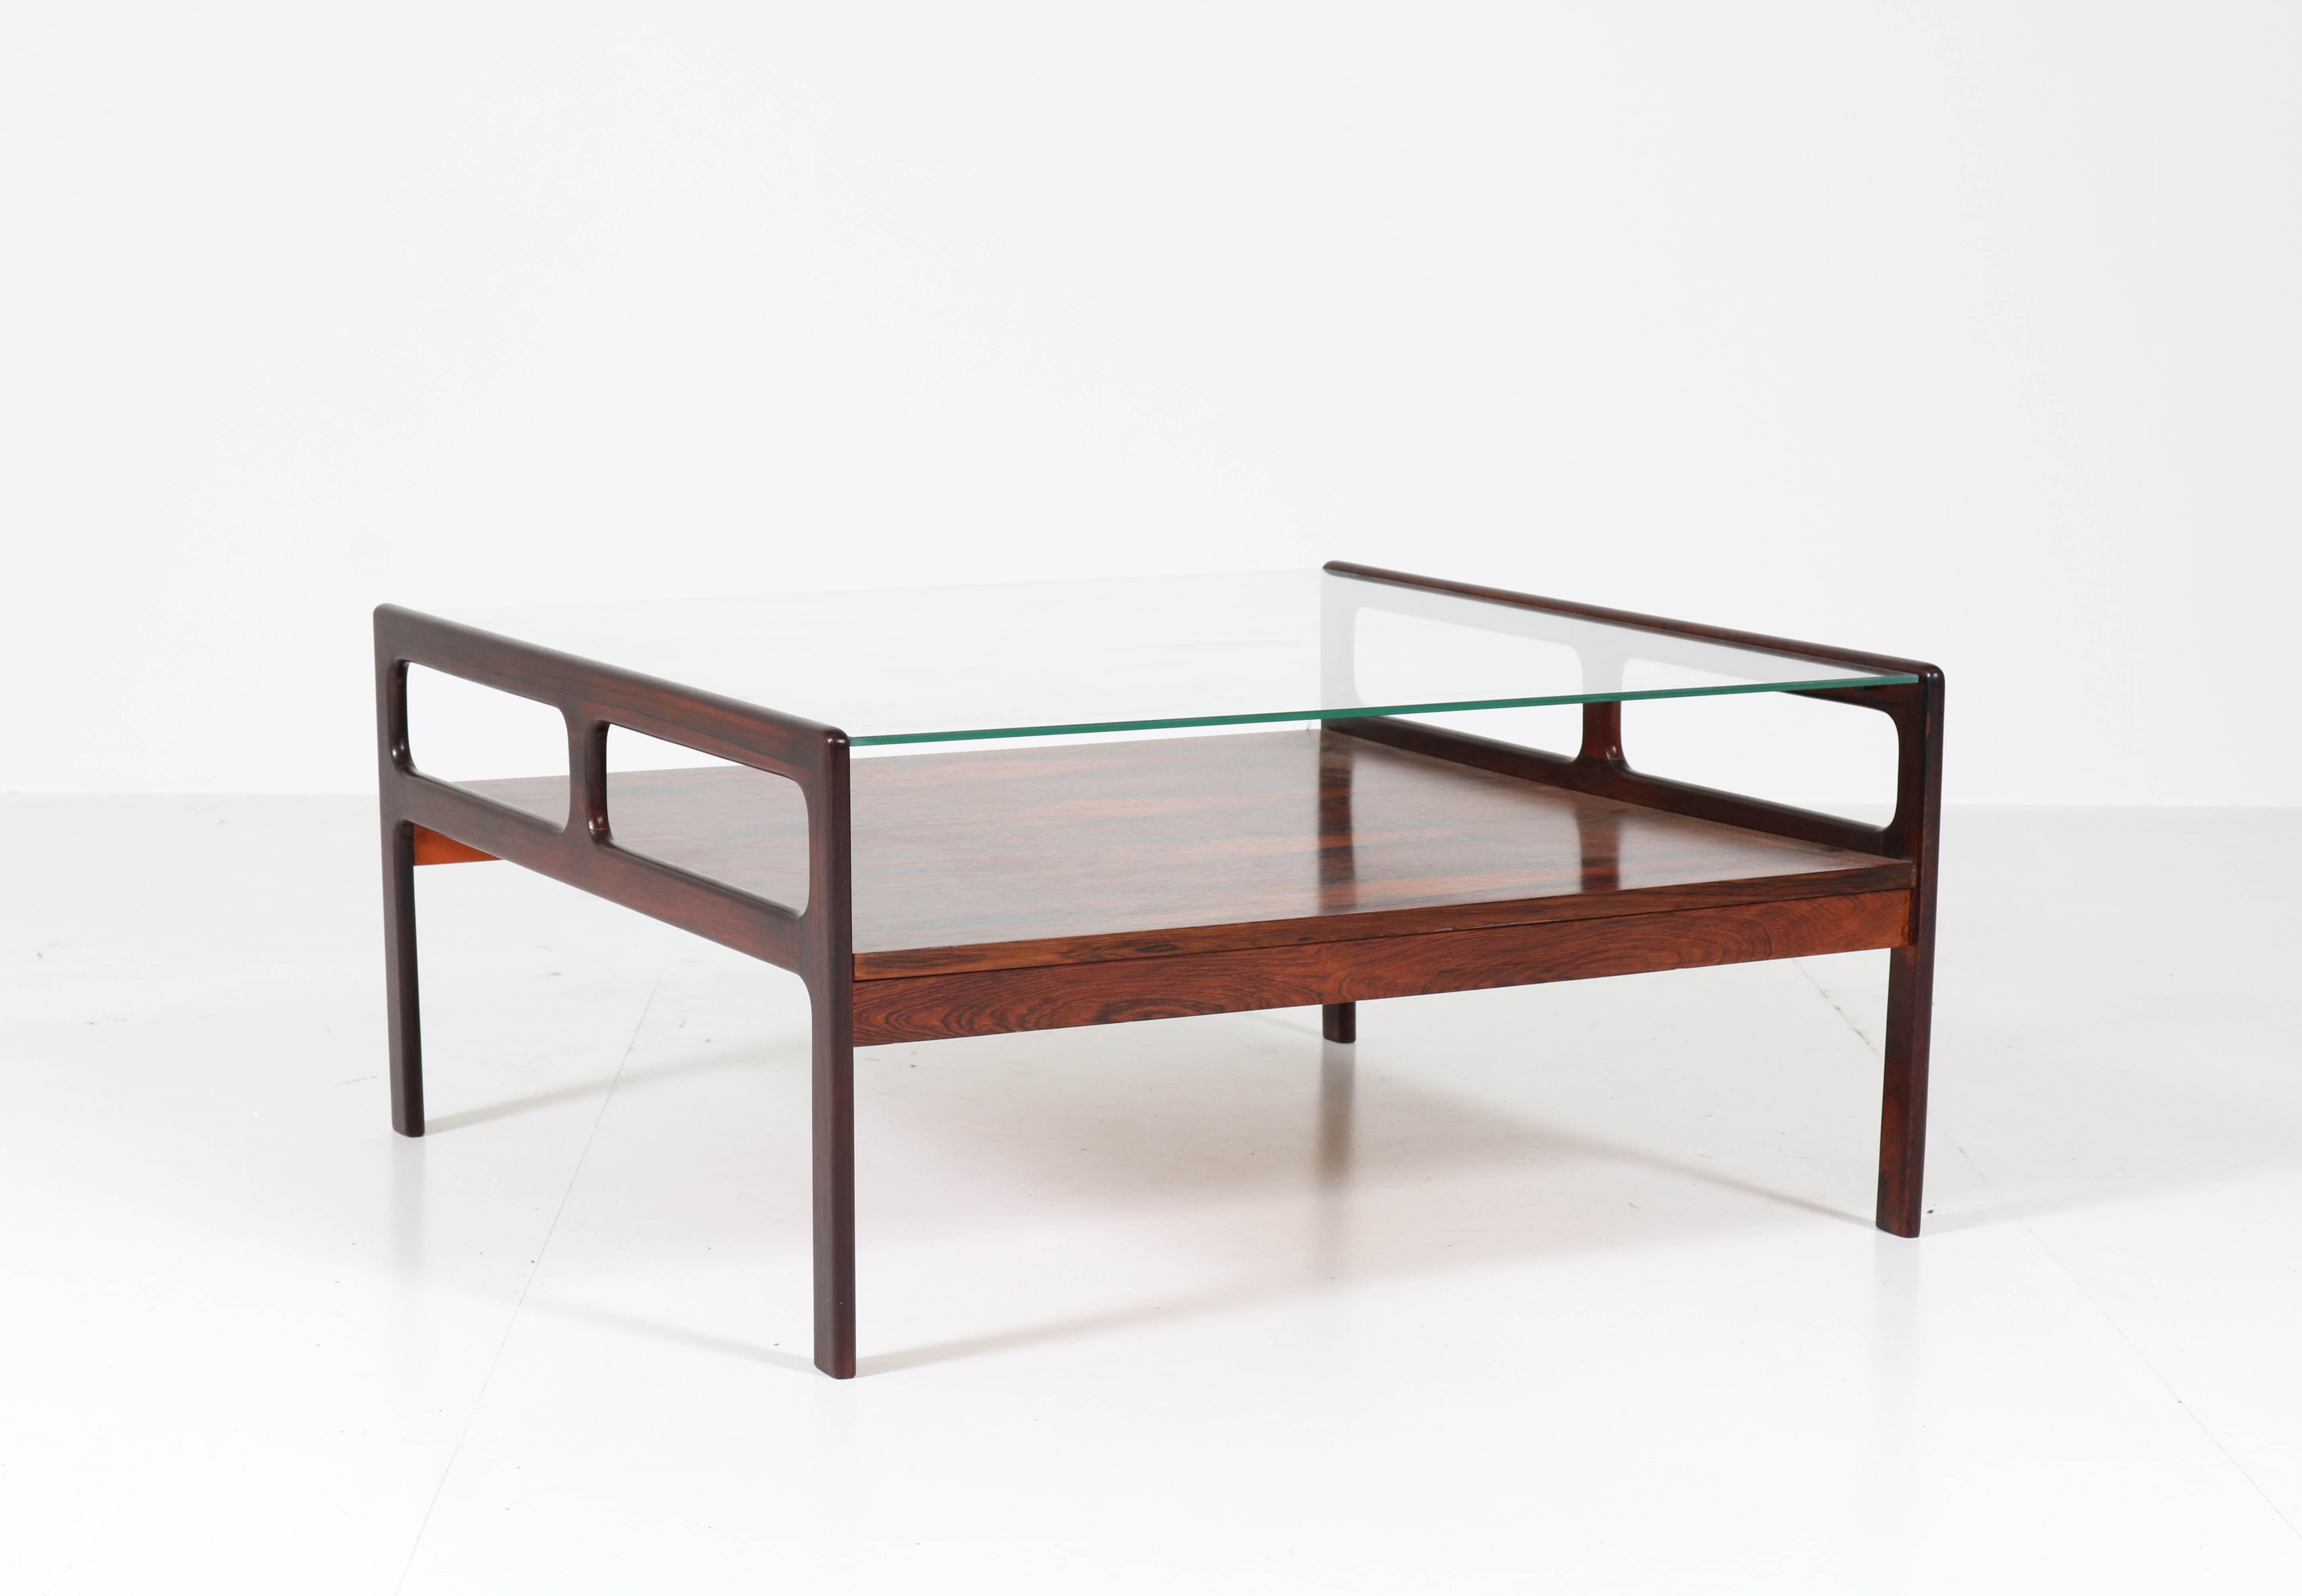 Wonderful Mid-Century Modern coffee table.
Striking Scandinavian design from the 1960s.
Rosewood base with glass top.
In good original condition with minor wear consistent with age and use,
preserving a beautiful patina.